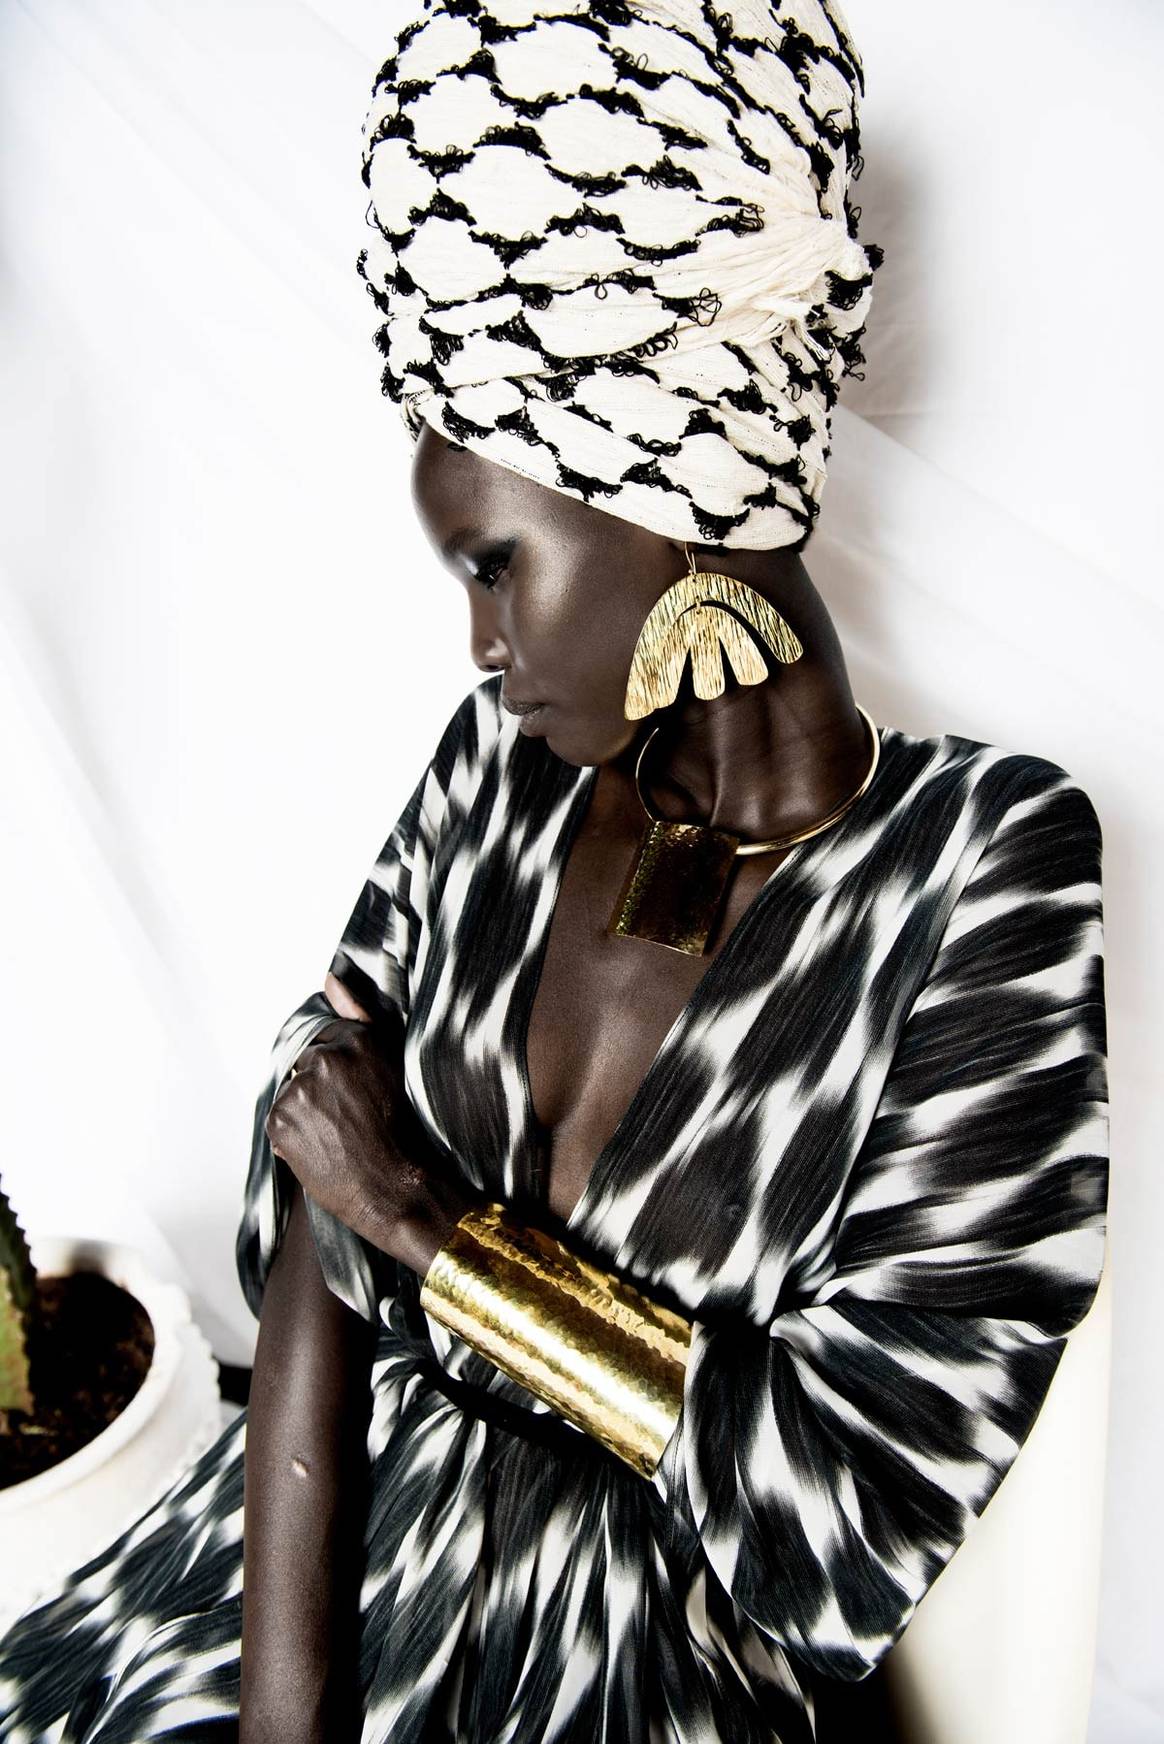 Meet the Senegalese brand whose prints are based on mathematical equations